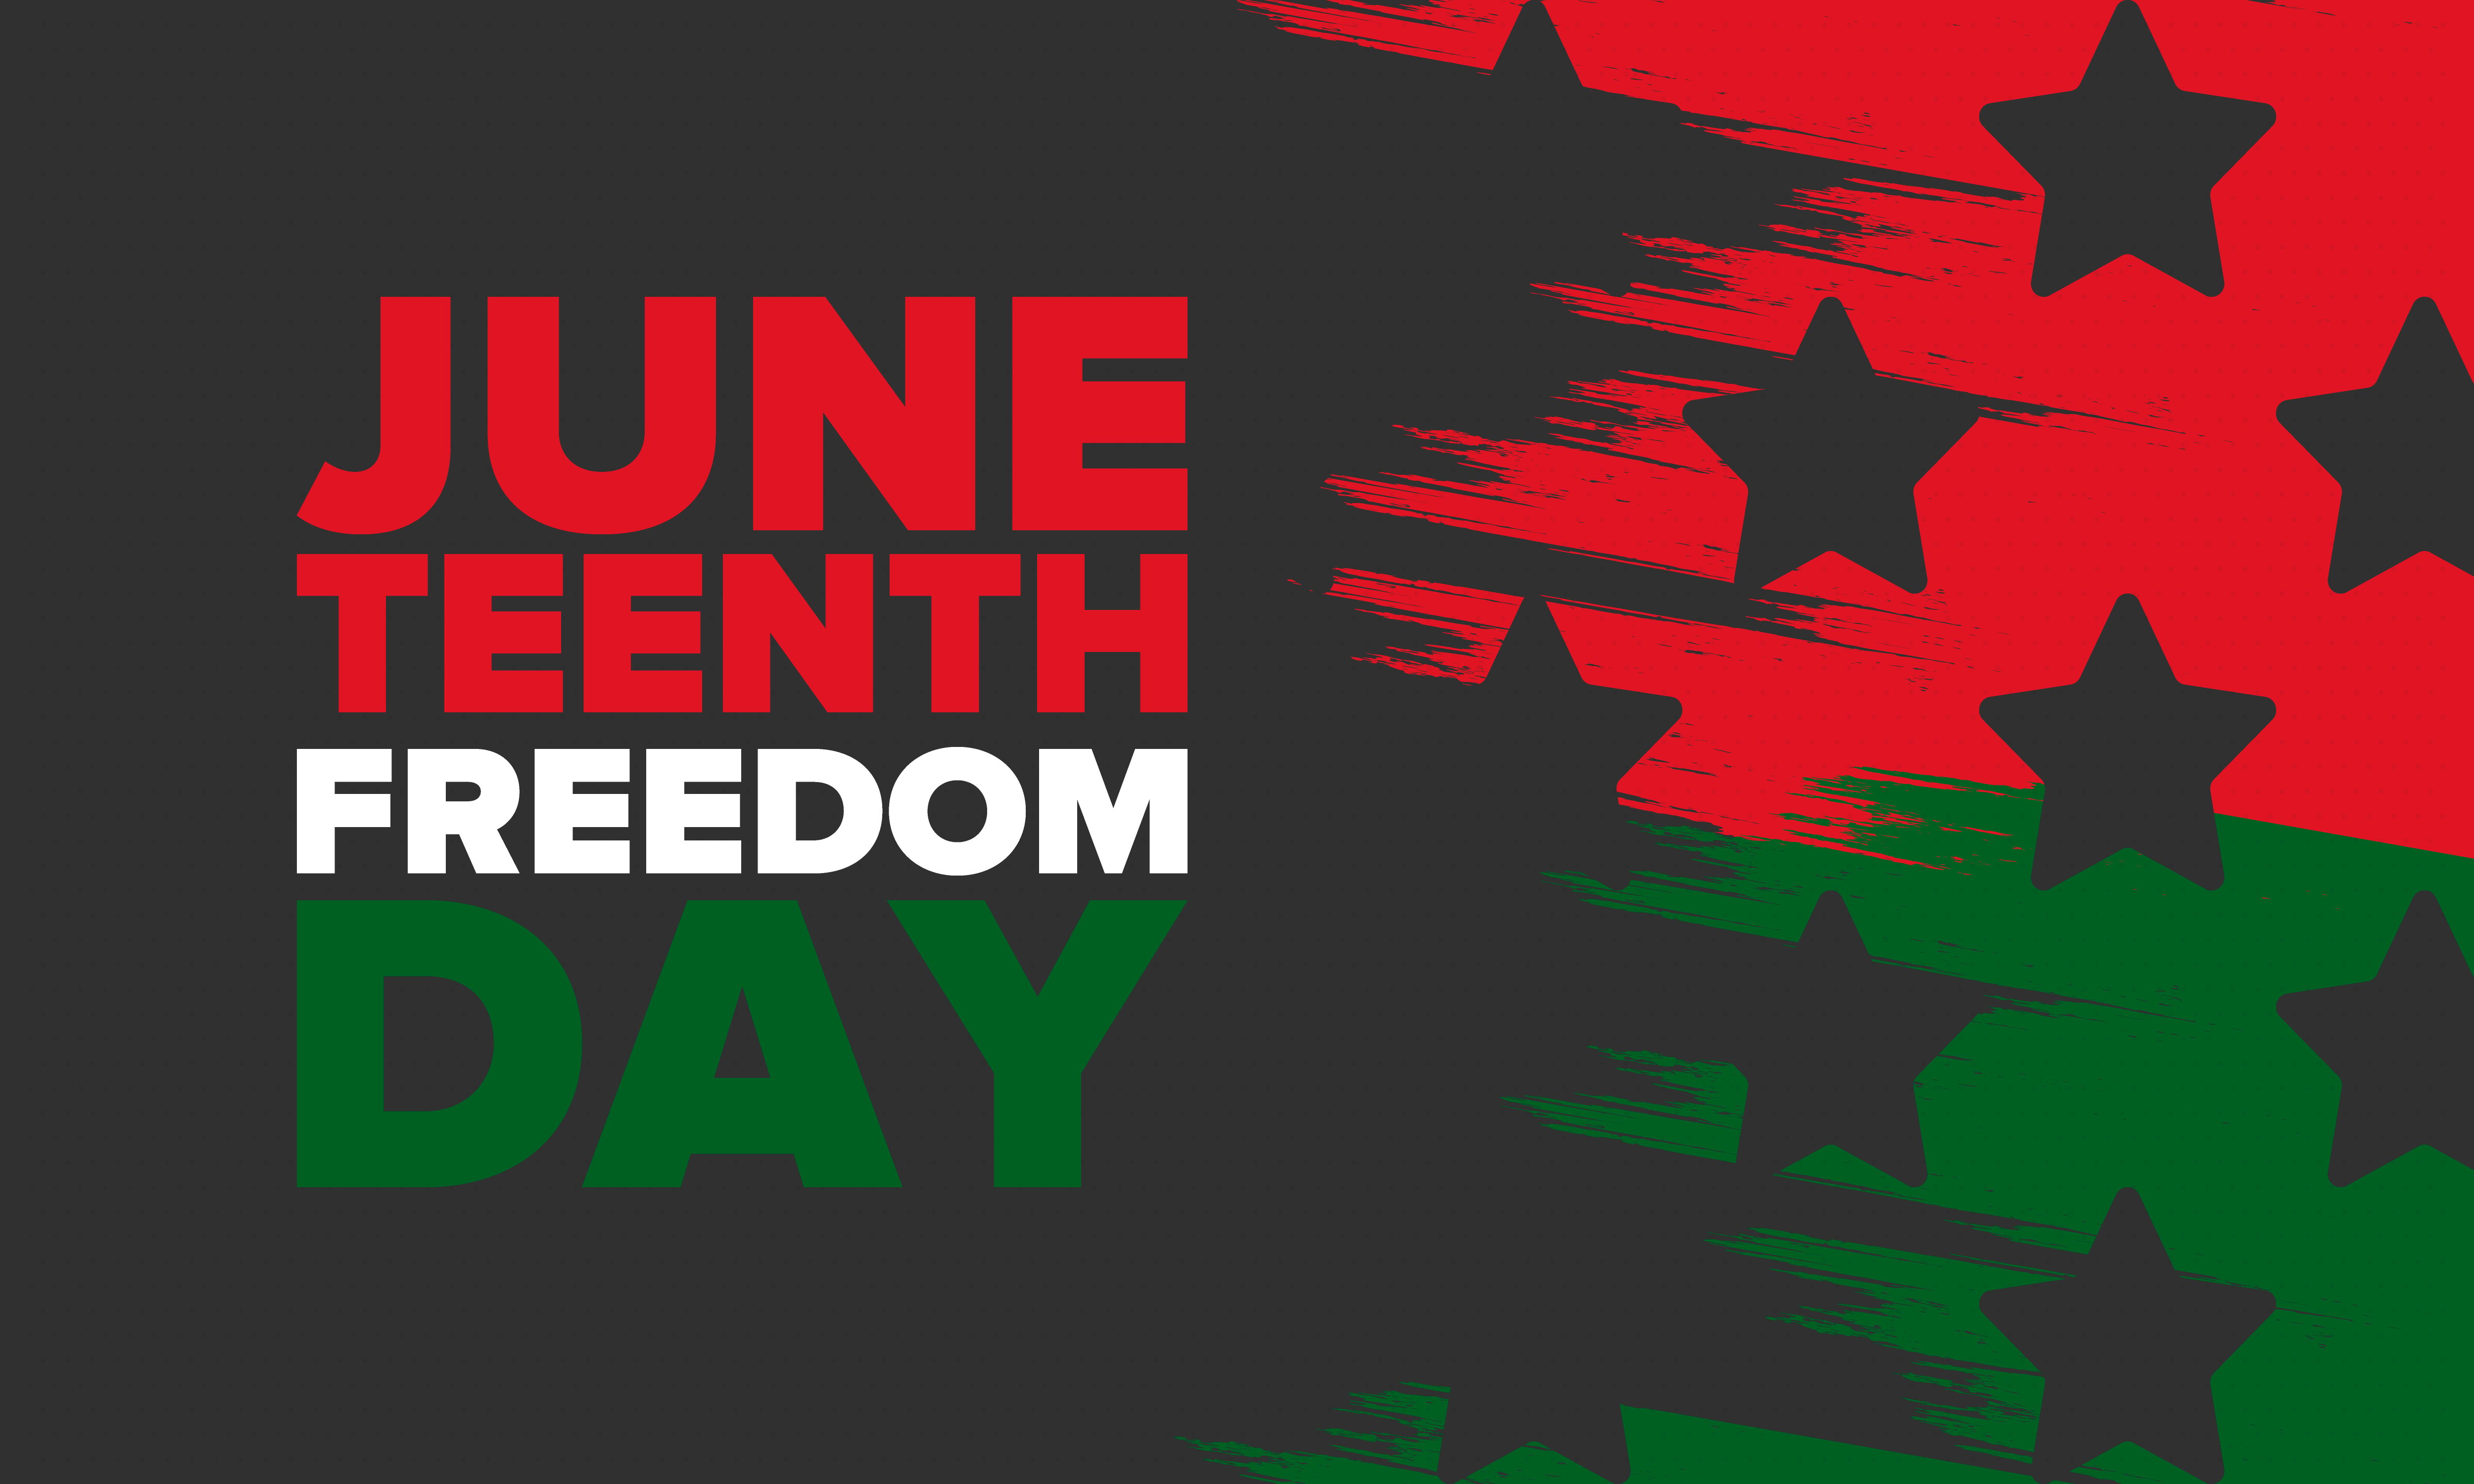 Juneteenth Freedom Day 